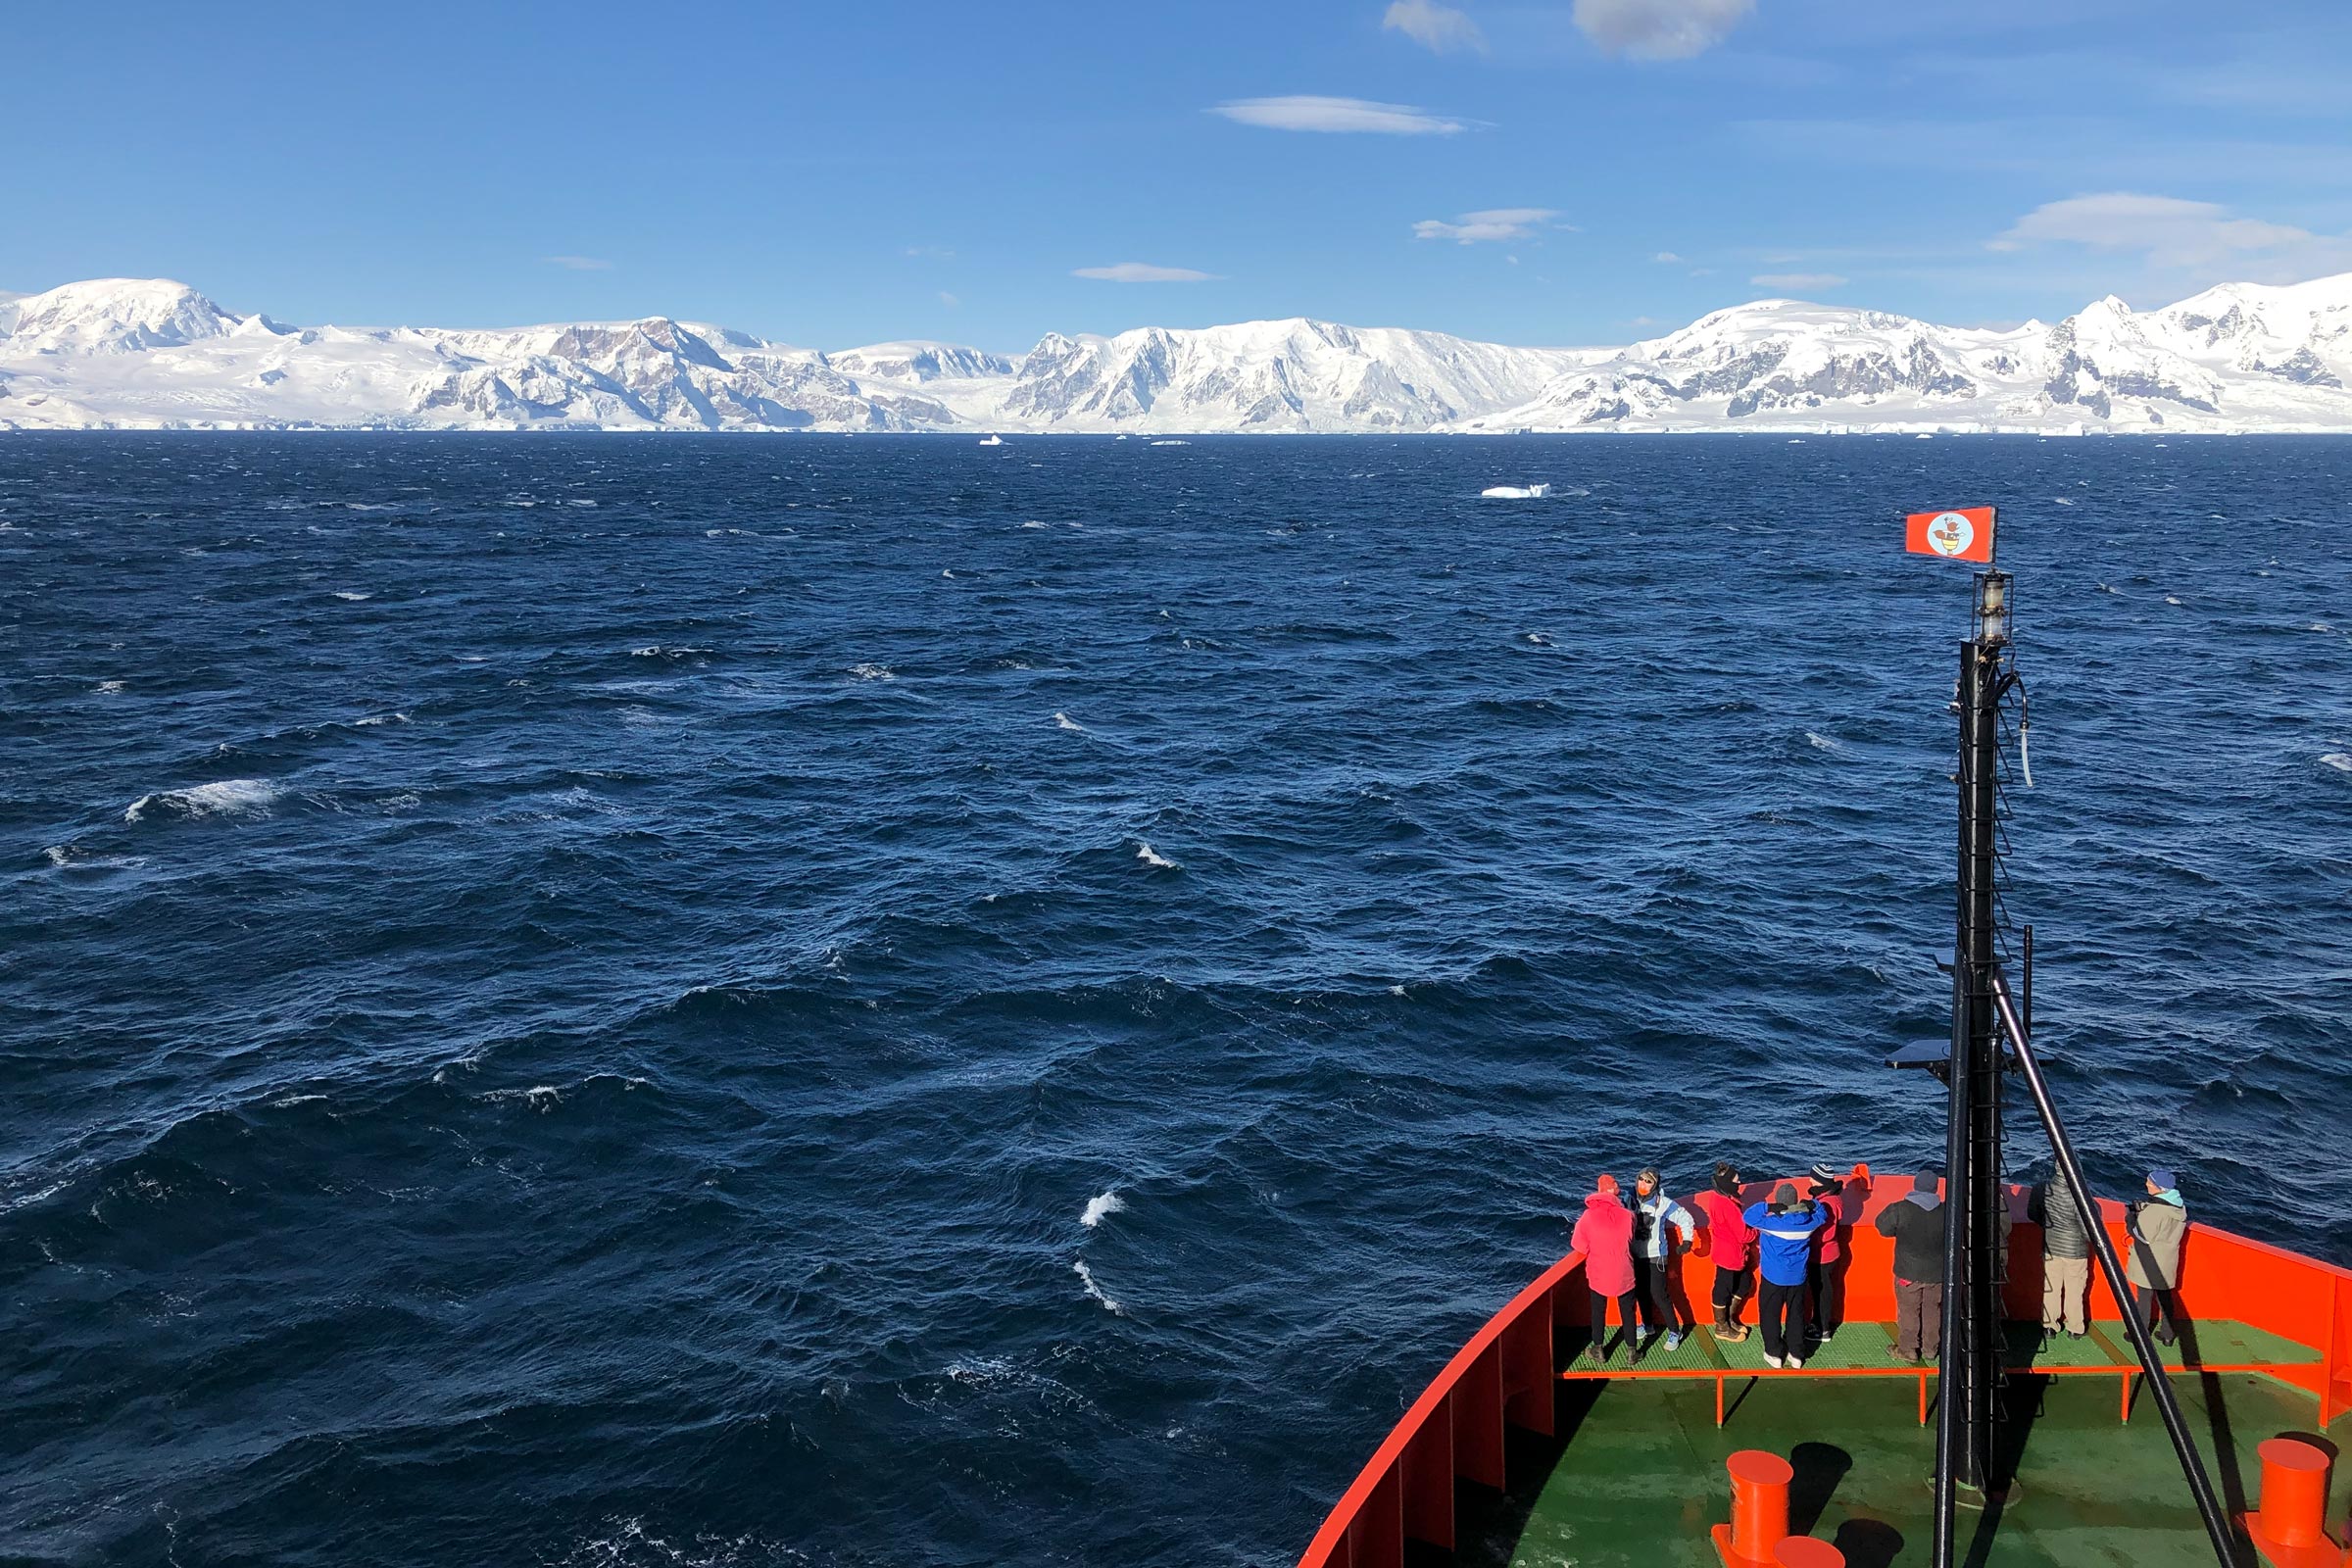 Nine researchers stand on a boat looking out over the water at the distant glacial coastline